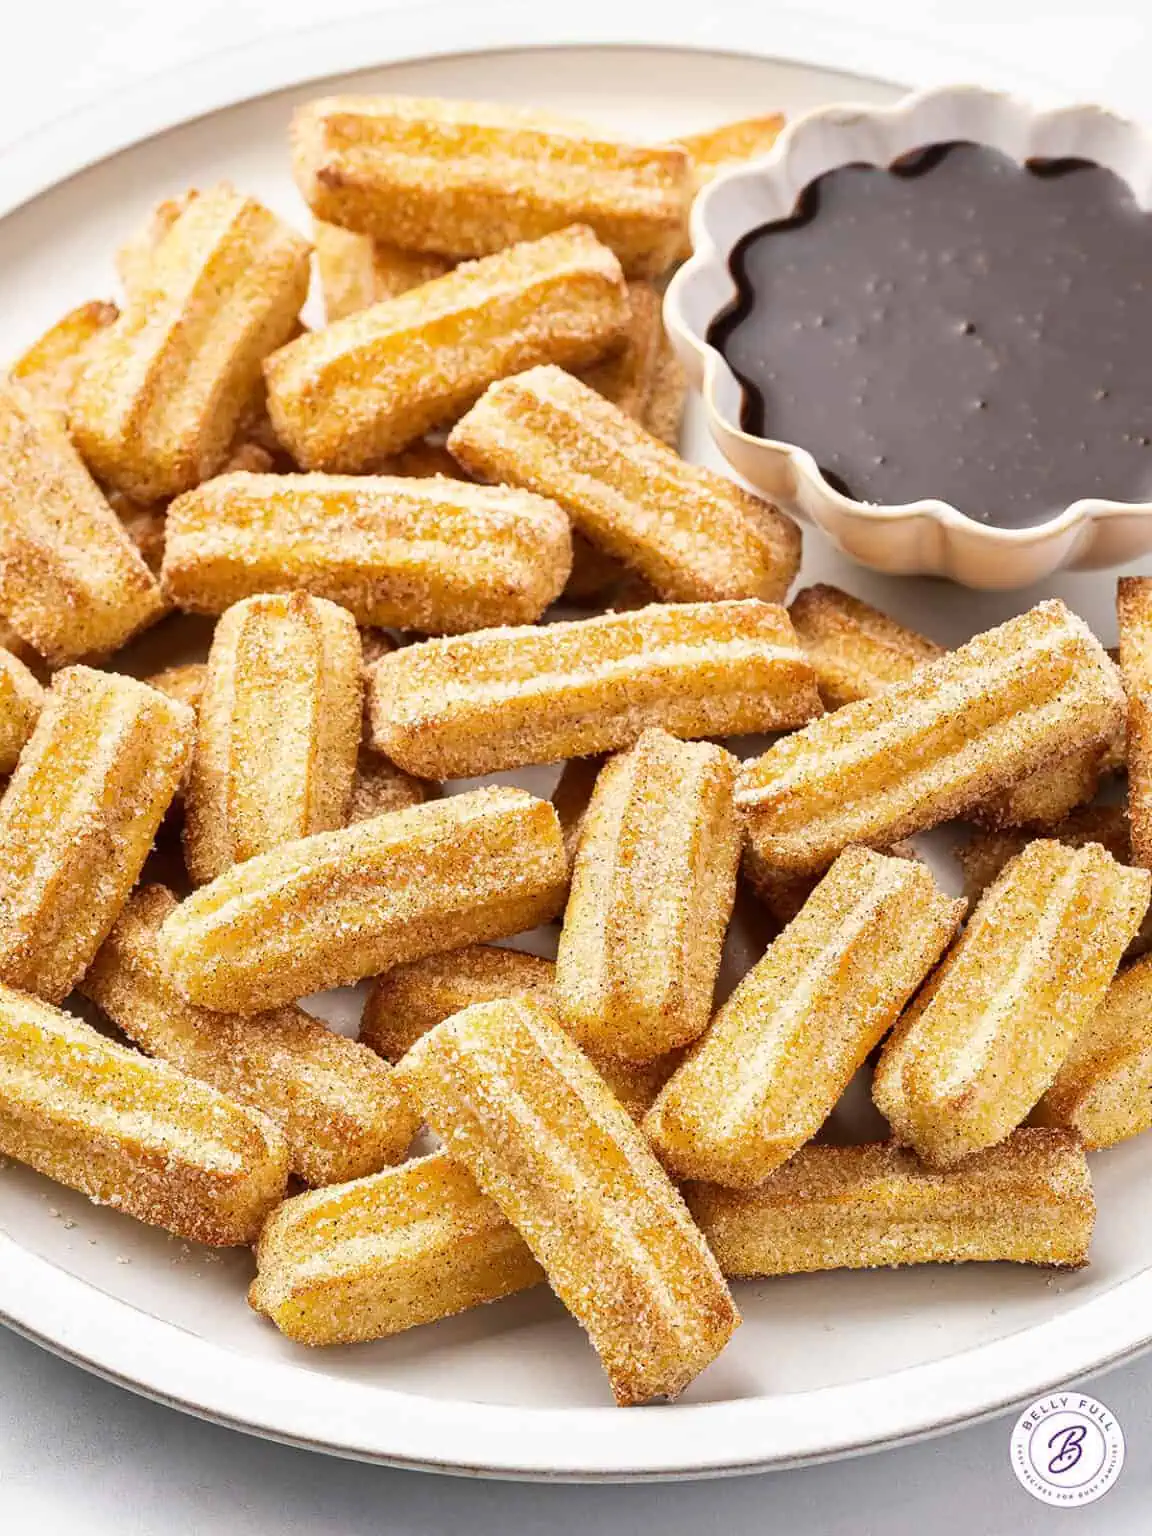 Assortment of delectable Air Fryer Dessert Recipes, featuring crispy treats, and healthy desserts using innovative air frying techniques.